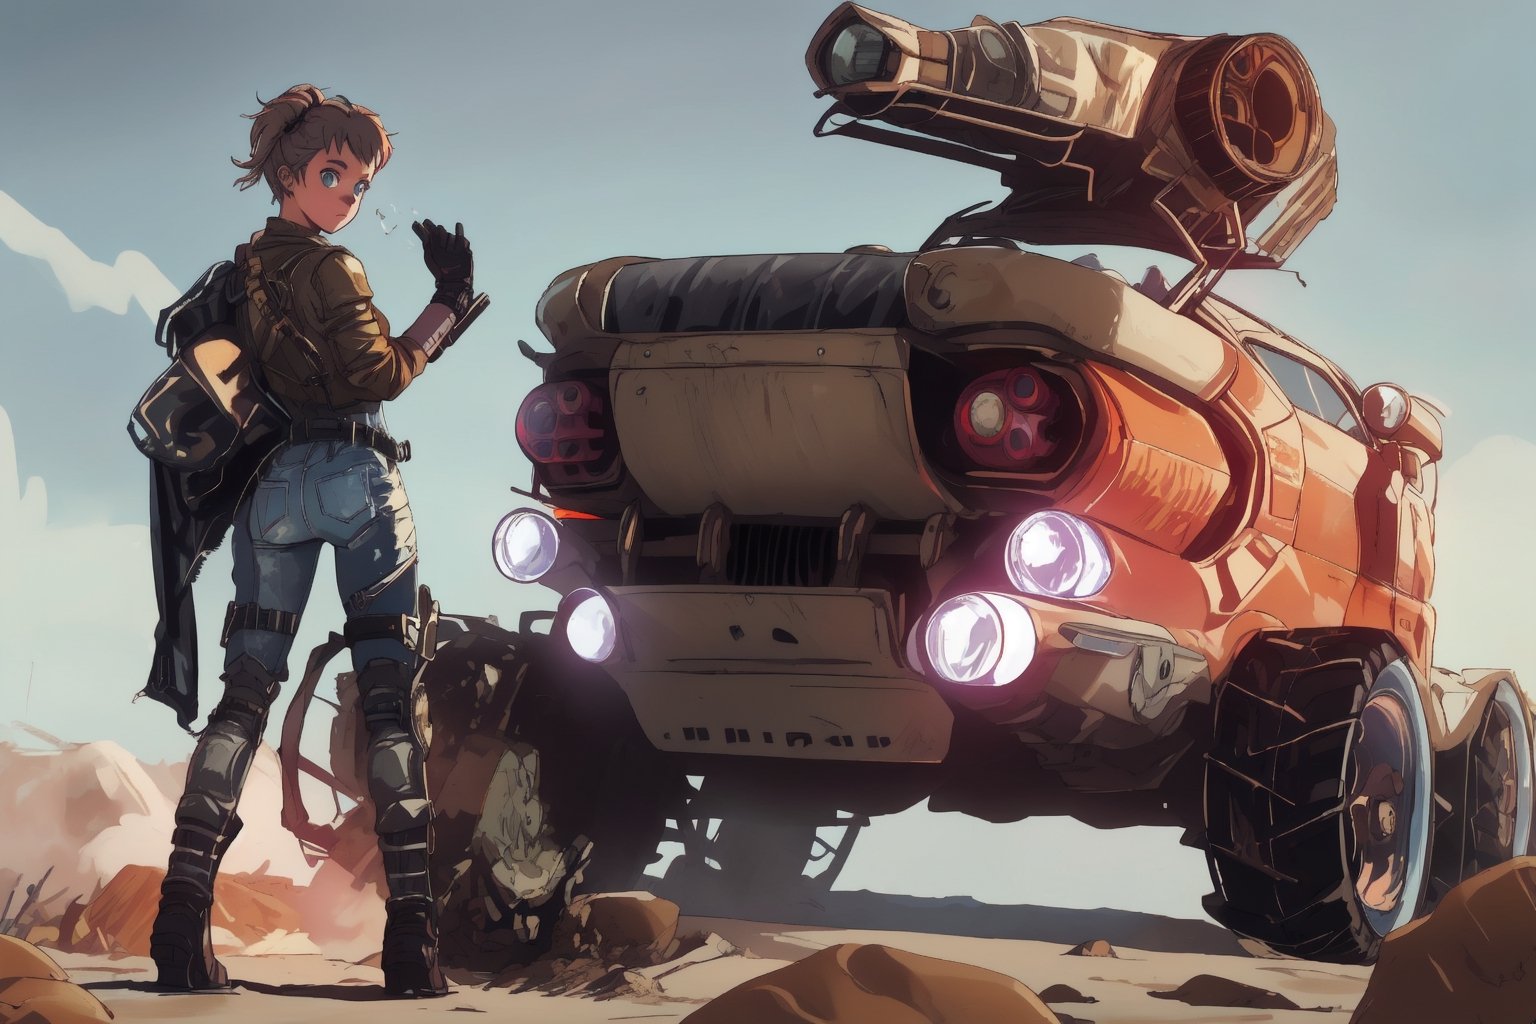 a young beautiful girl with short disheveled pigtails, she is dressed in the clothes of a post-apocalyptic raider, a post-apocalyptic car from the movie mad max, a car made from scrap metal, a car made from parts of different cars, a car made from spare parts of various cars, crossout, crossout craft, post-apocalypse, wasteland, devastation, in the background a deserted city covered with sand, the houses in it are dilapidated